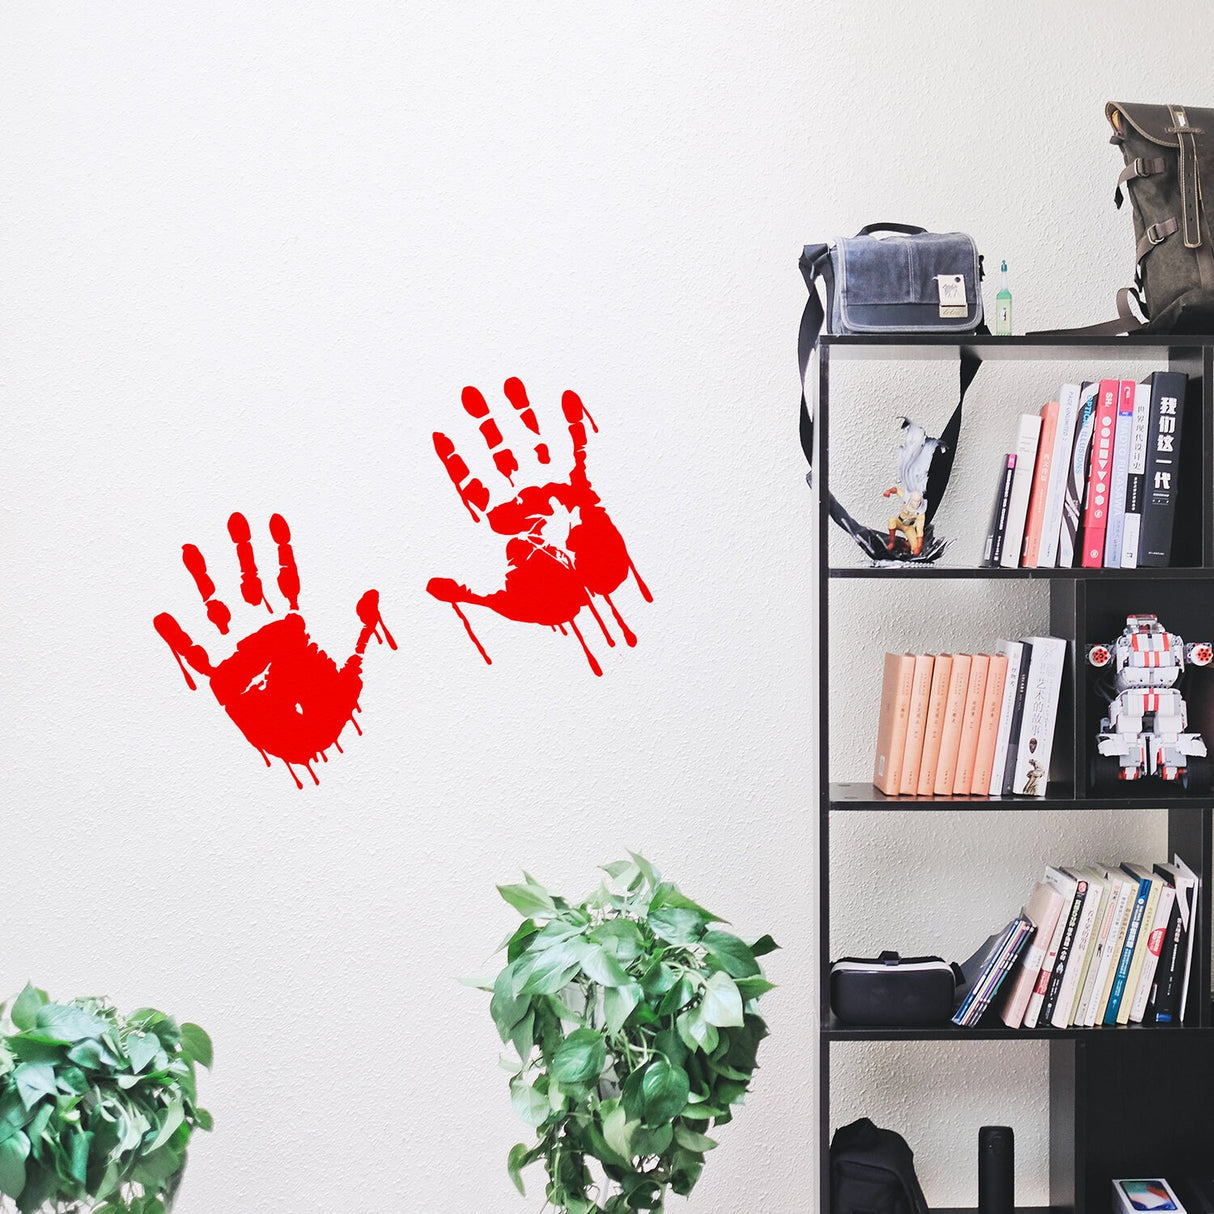 Bloody Hands Scary Red Vinyl Sticker - Zombie Blood Car Wall Laptop Window Halloween Decal Print